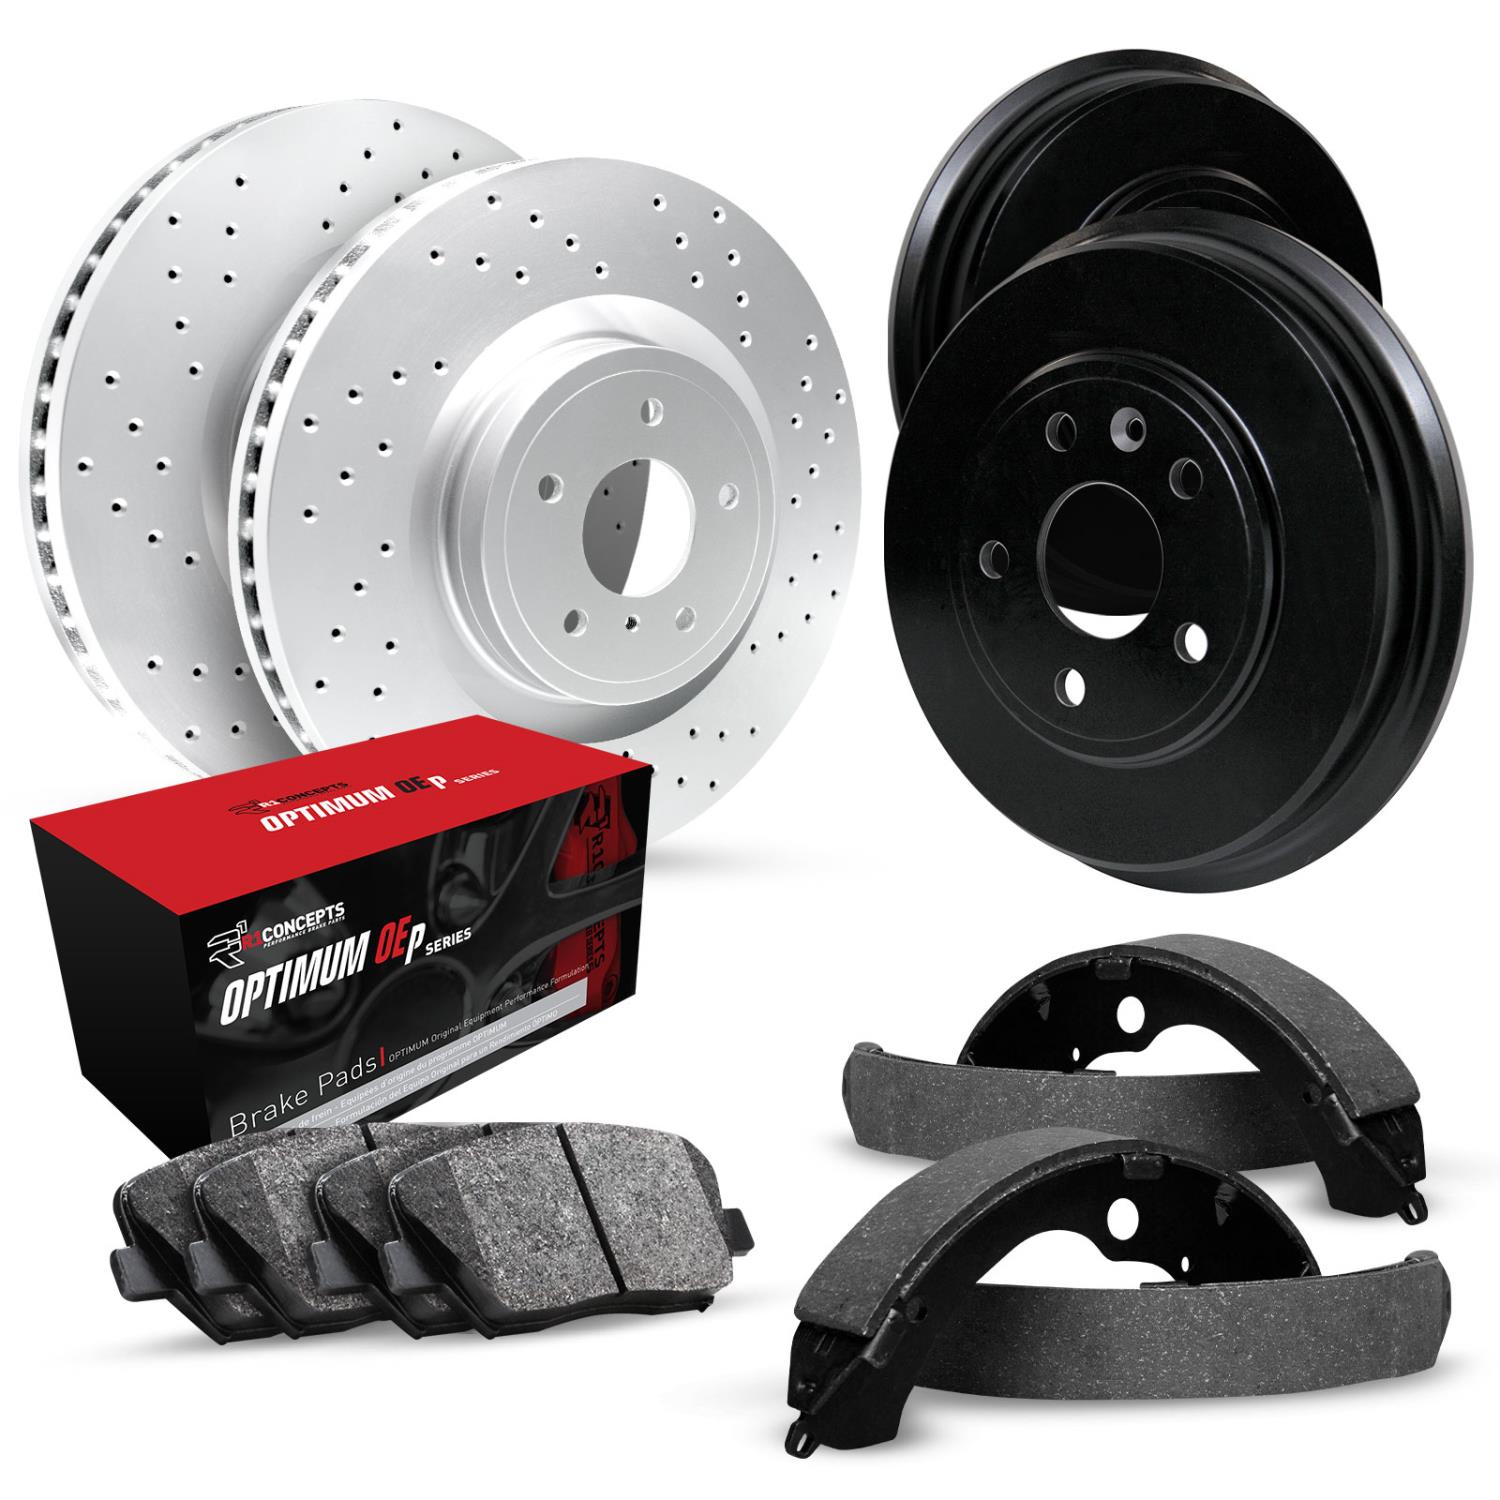 GEO-Carbon Drilled Brake Rotor & Drum Set w/Optimum OE Pads & Shoes, 1971-1975 GM, Position: Front & Rear